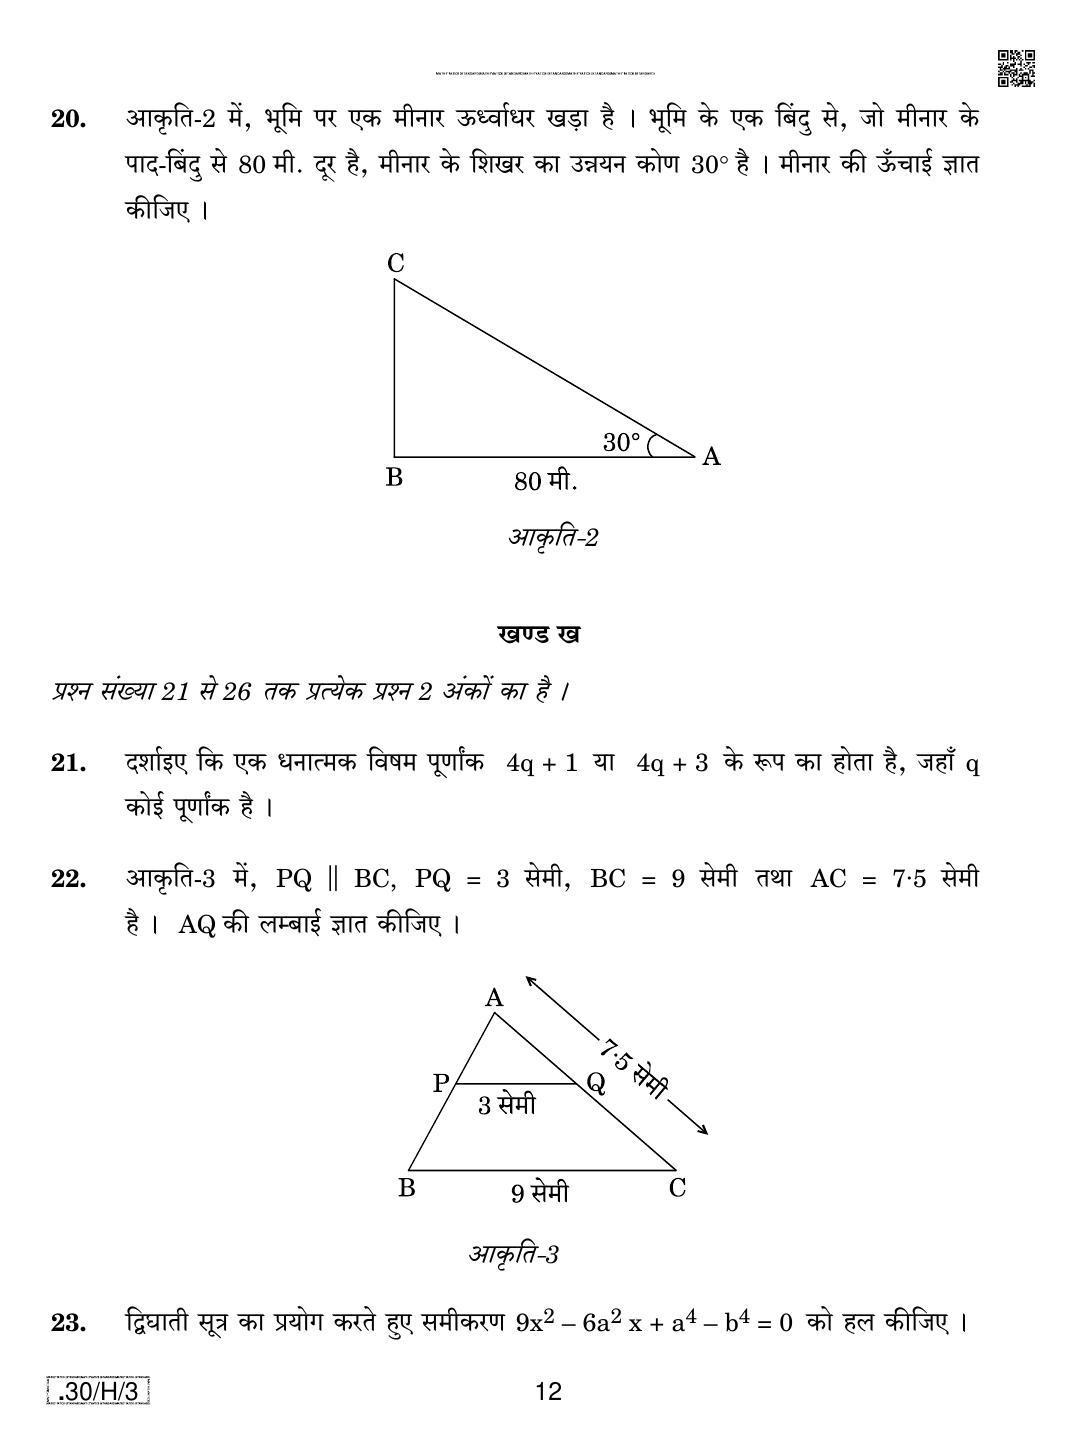 CBSE Class 10 30-C-3 - Maths (Standard) 2020 Compartment Question Paper - Page 12